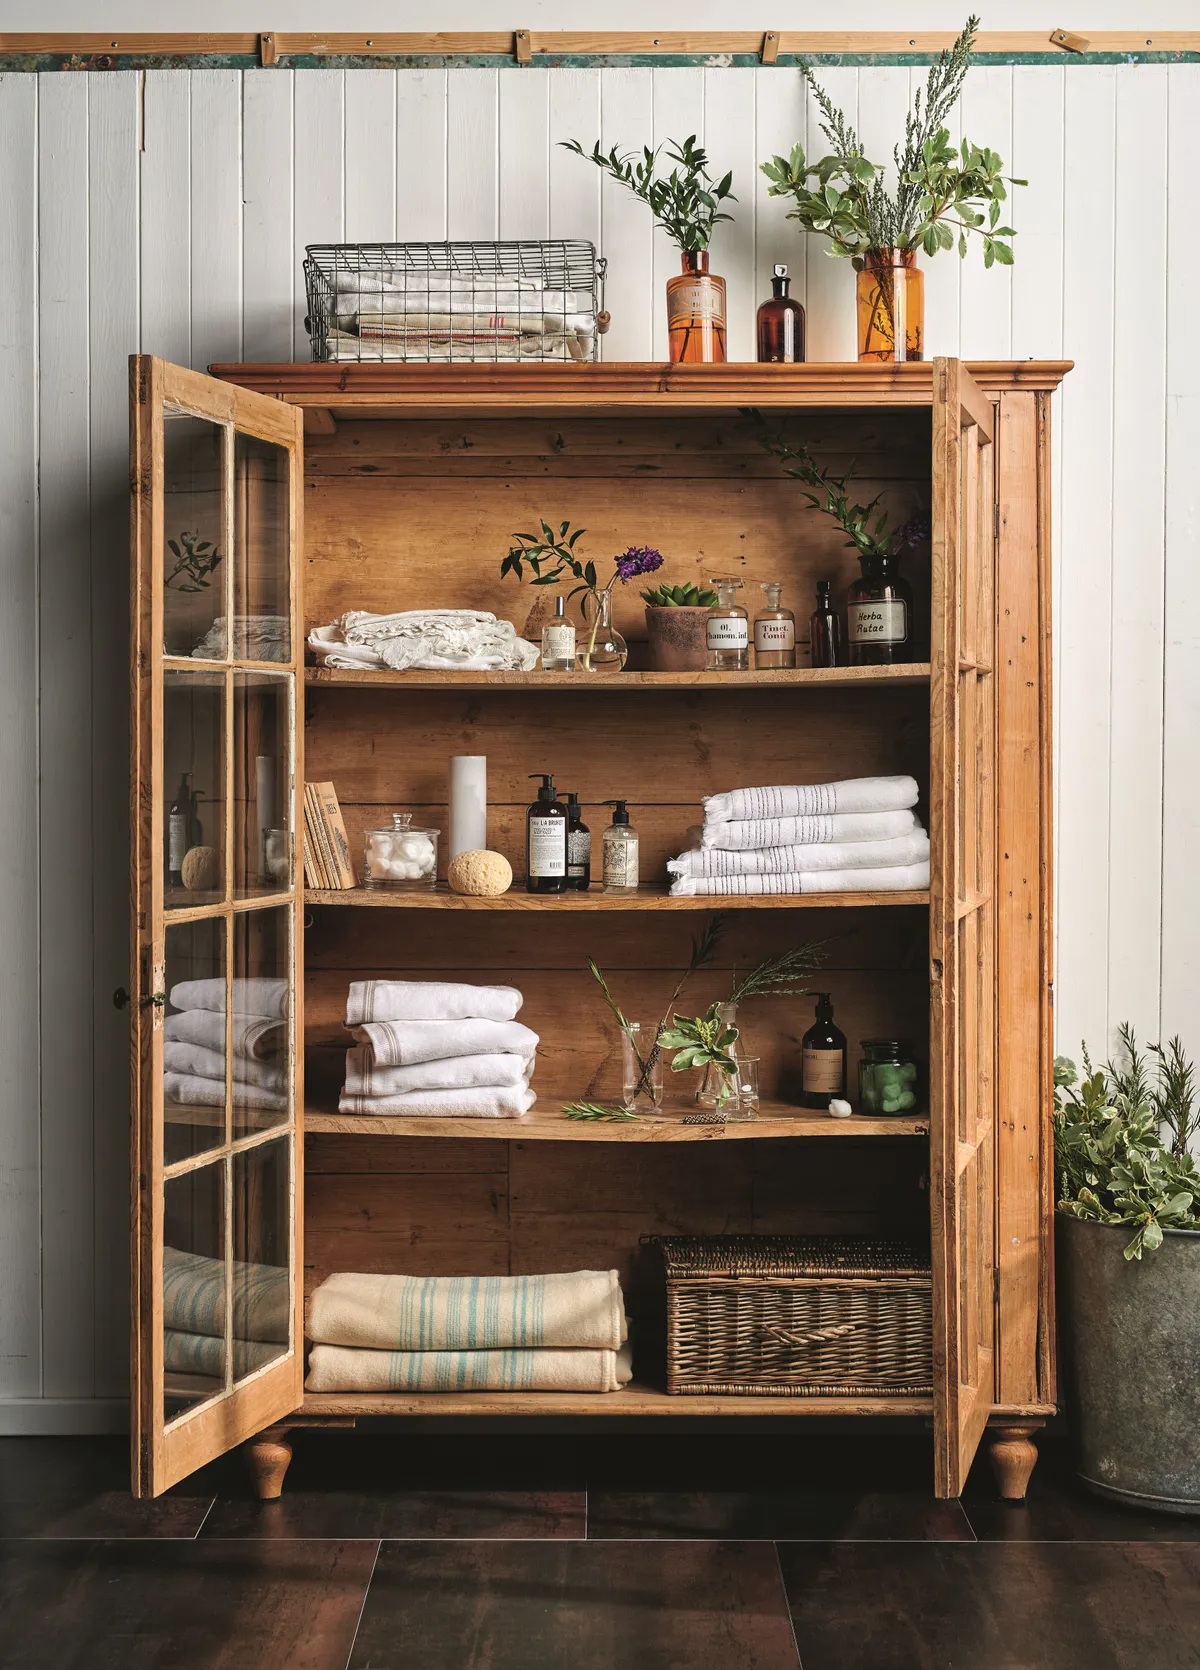 A glass-doored vintage display cabinet is used to show off towels, toiletries and plants in a bathroom.